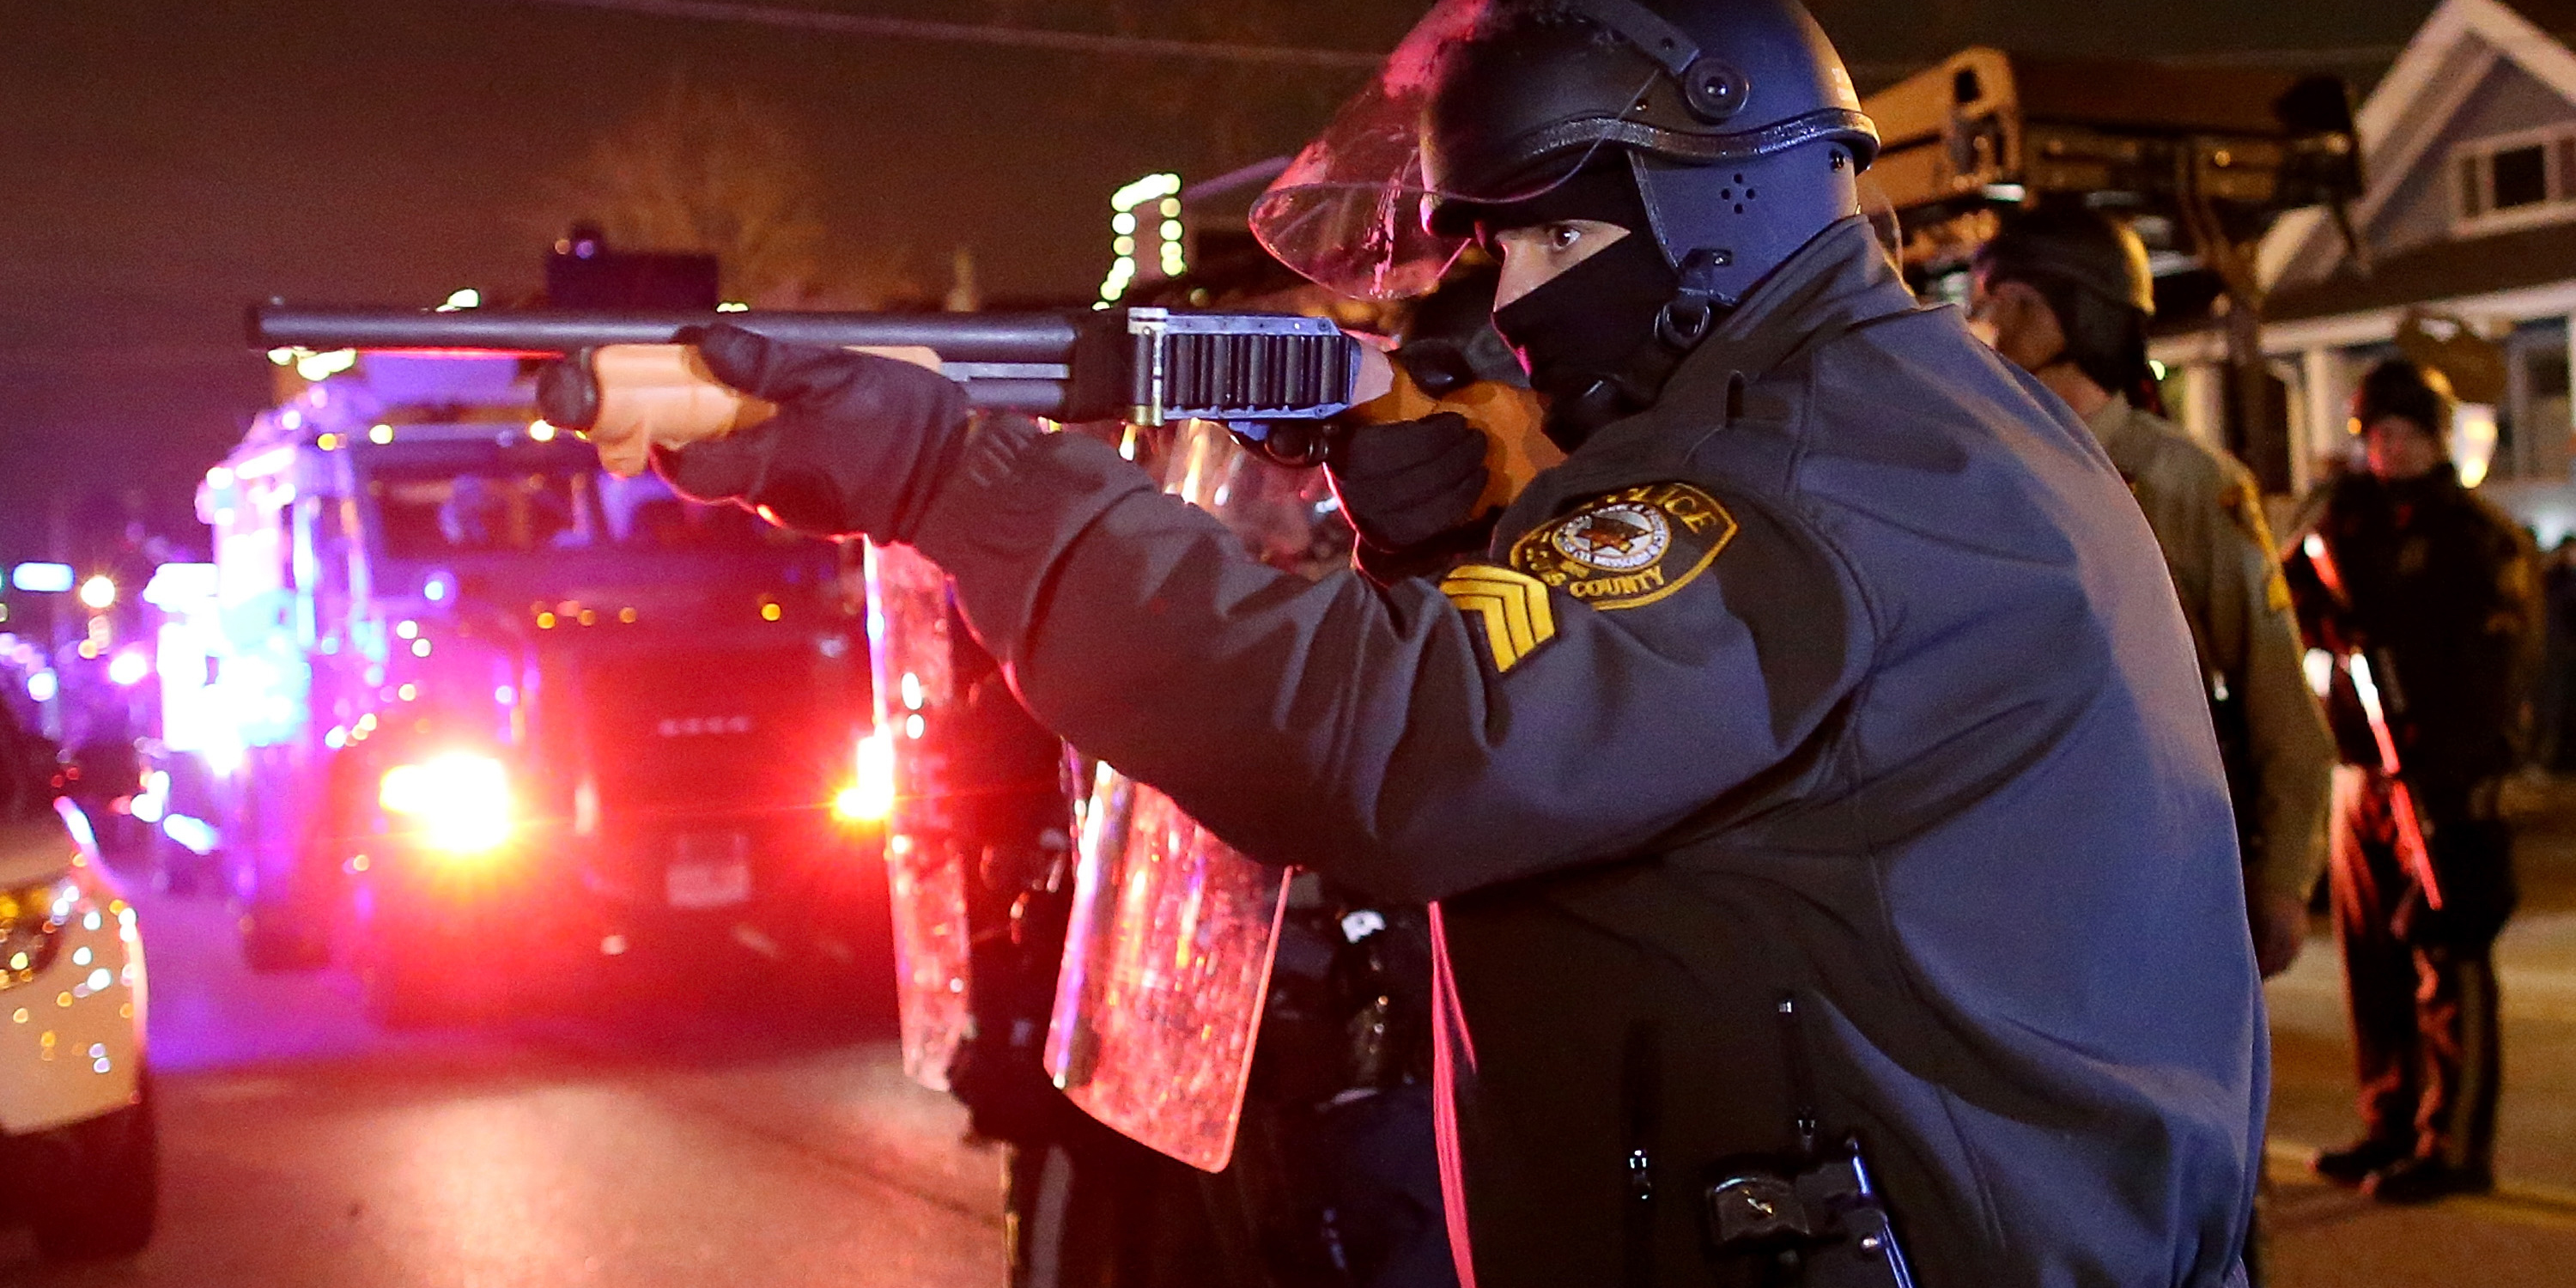 A deadly force: Police violence in the USA | Amnesty International UK